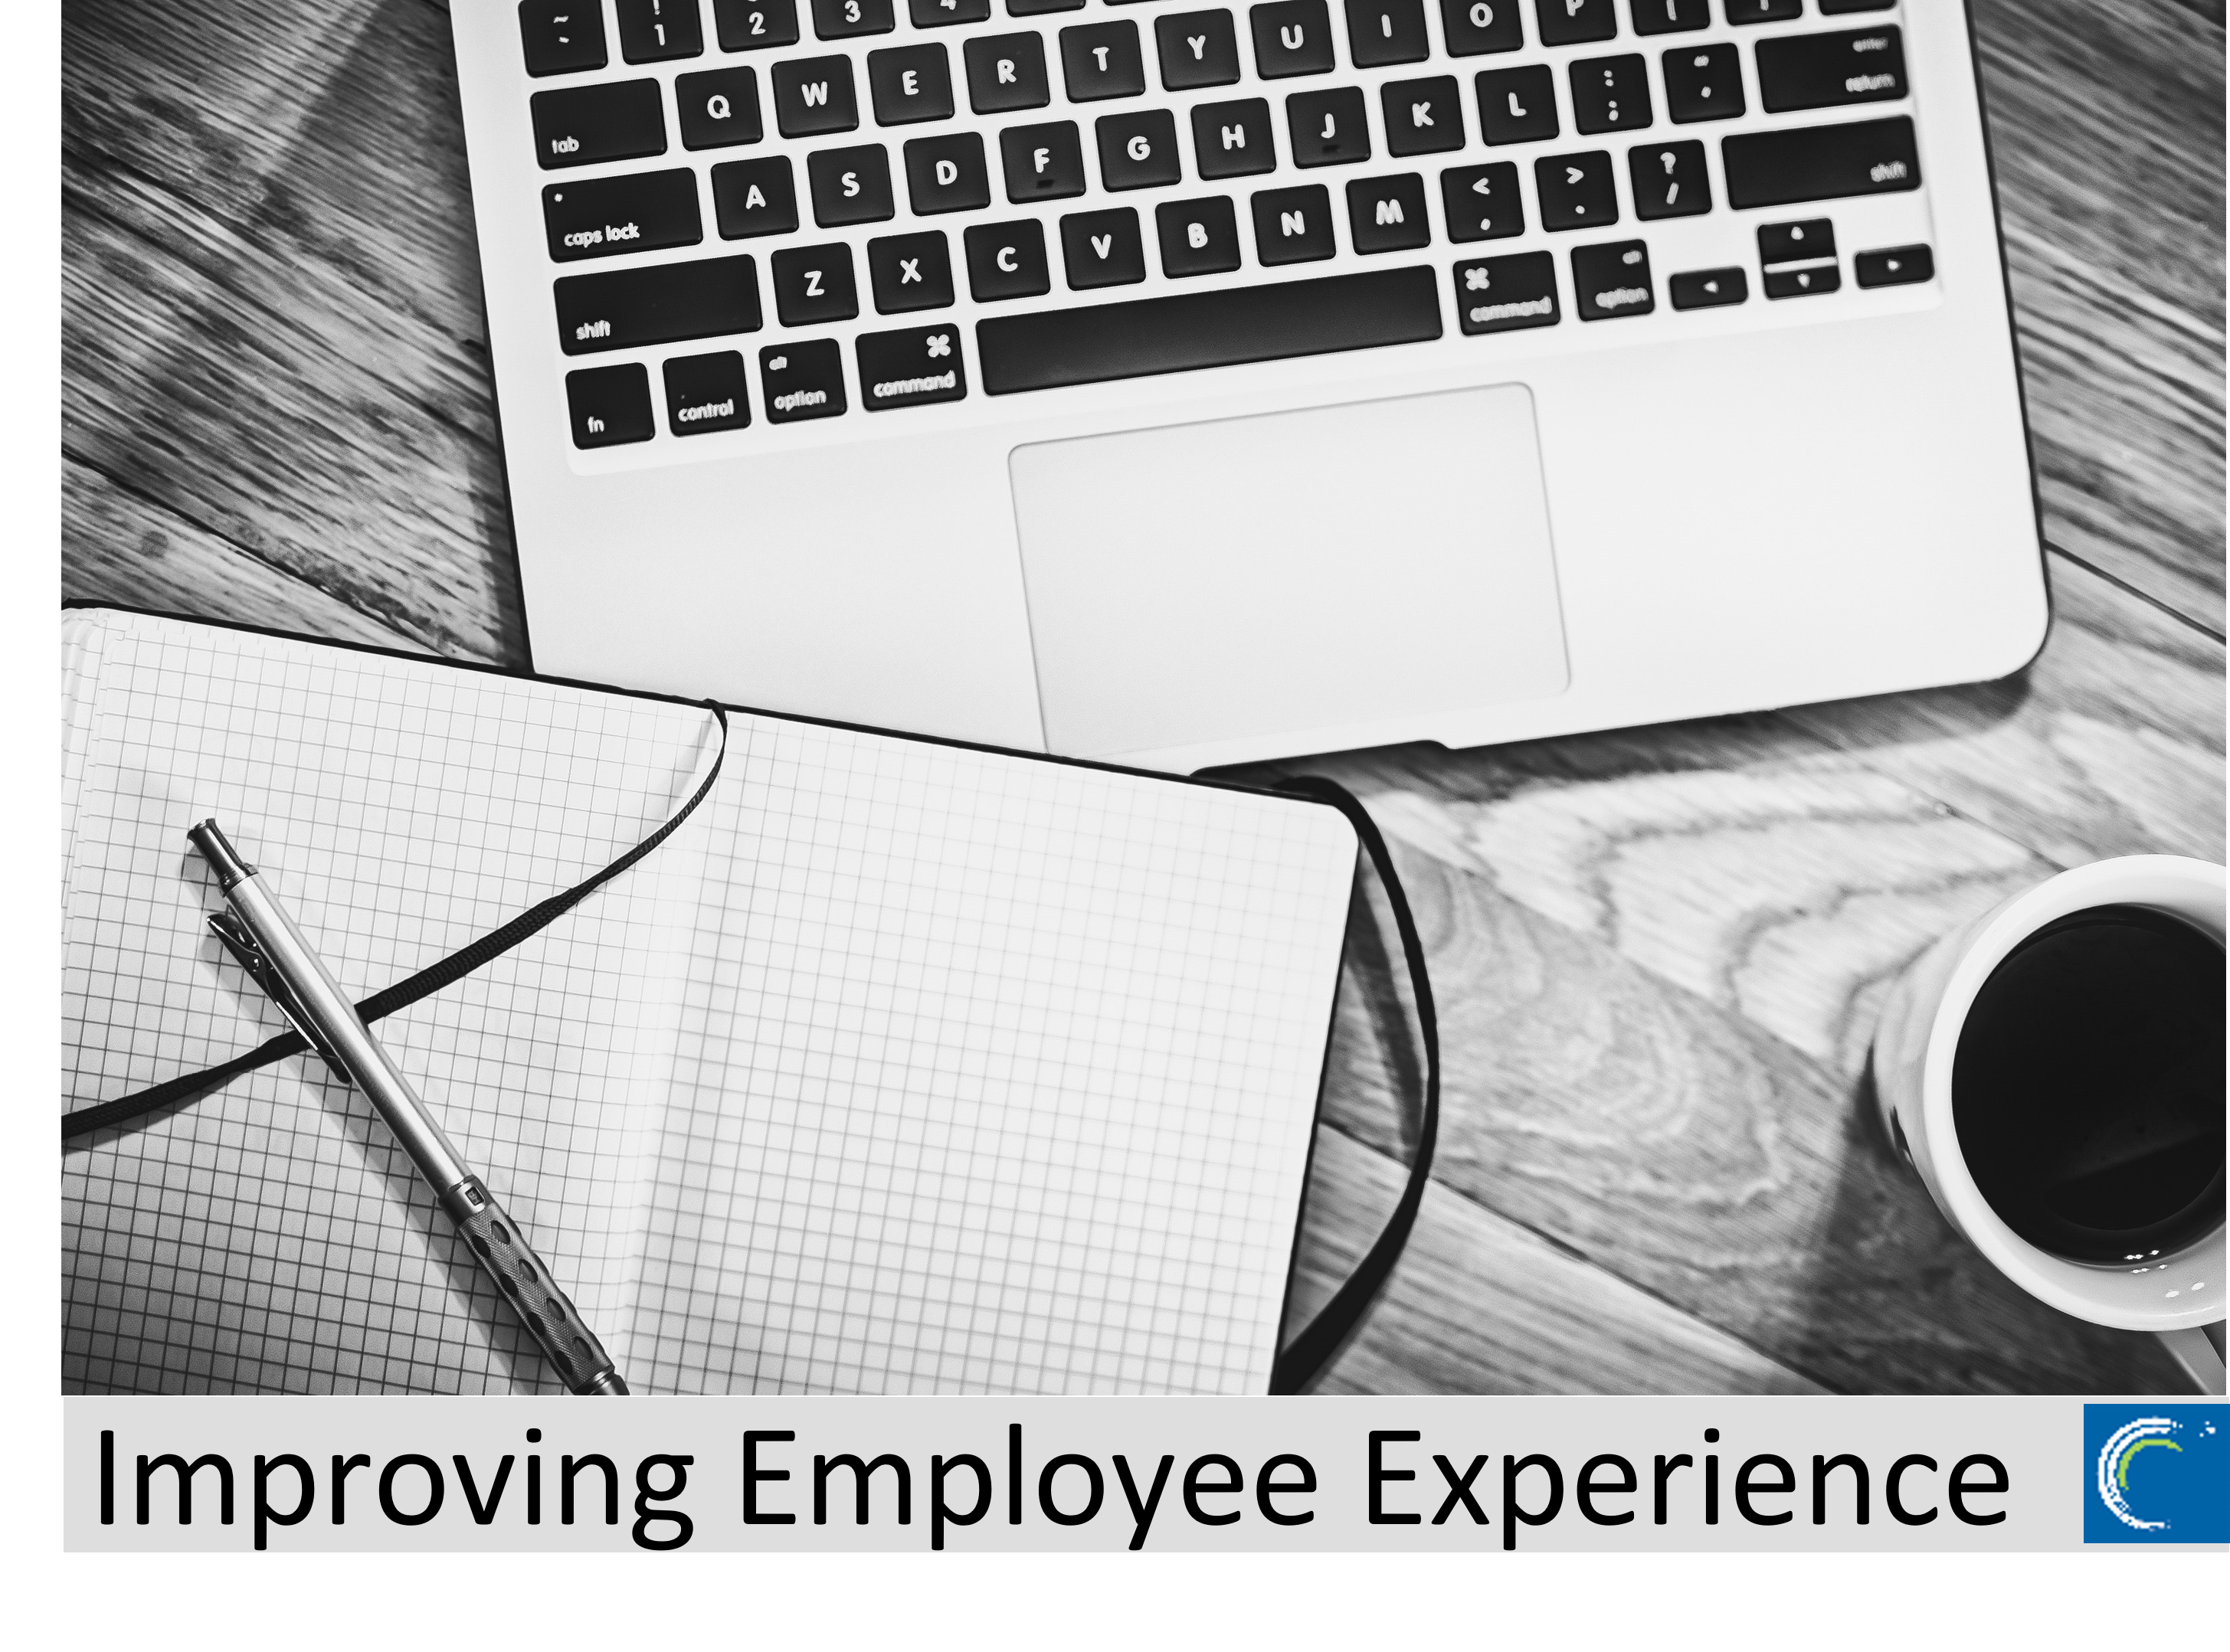 How to Improve Employee Experience